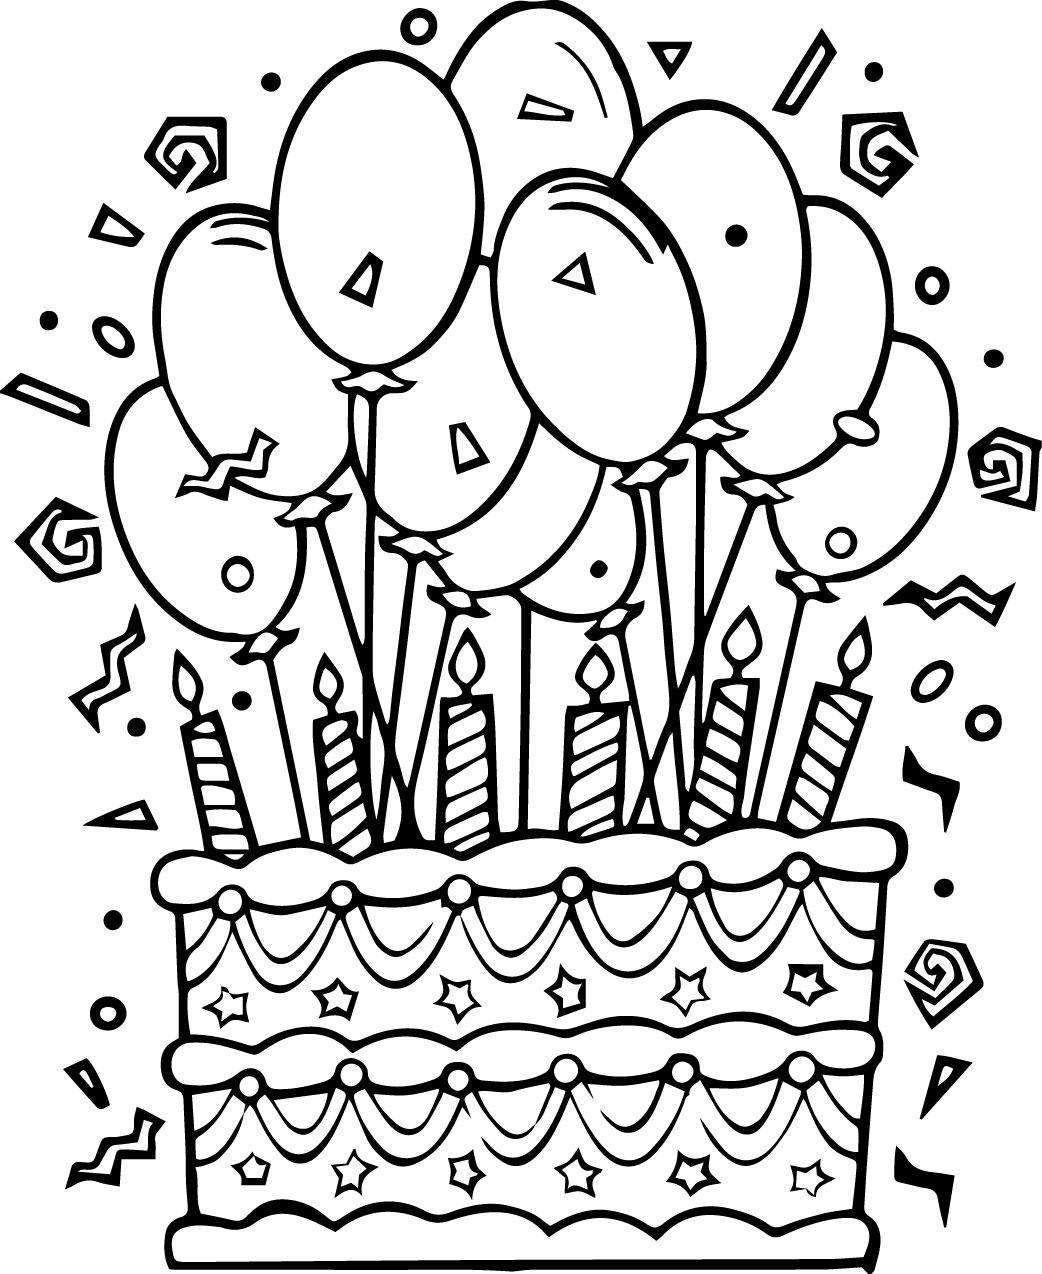 Coloring Cake with candles and balloons. Category cakes. Tags:  cake, candles, balloons.